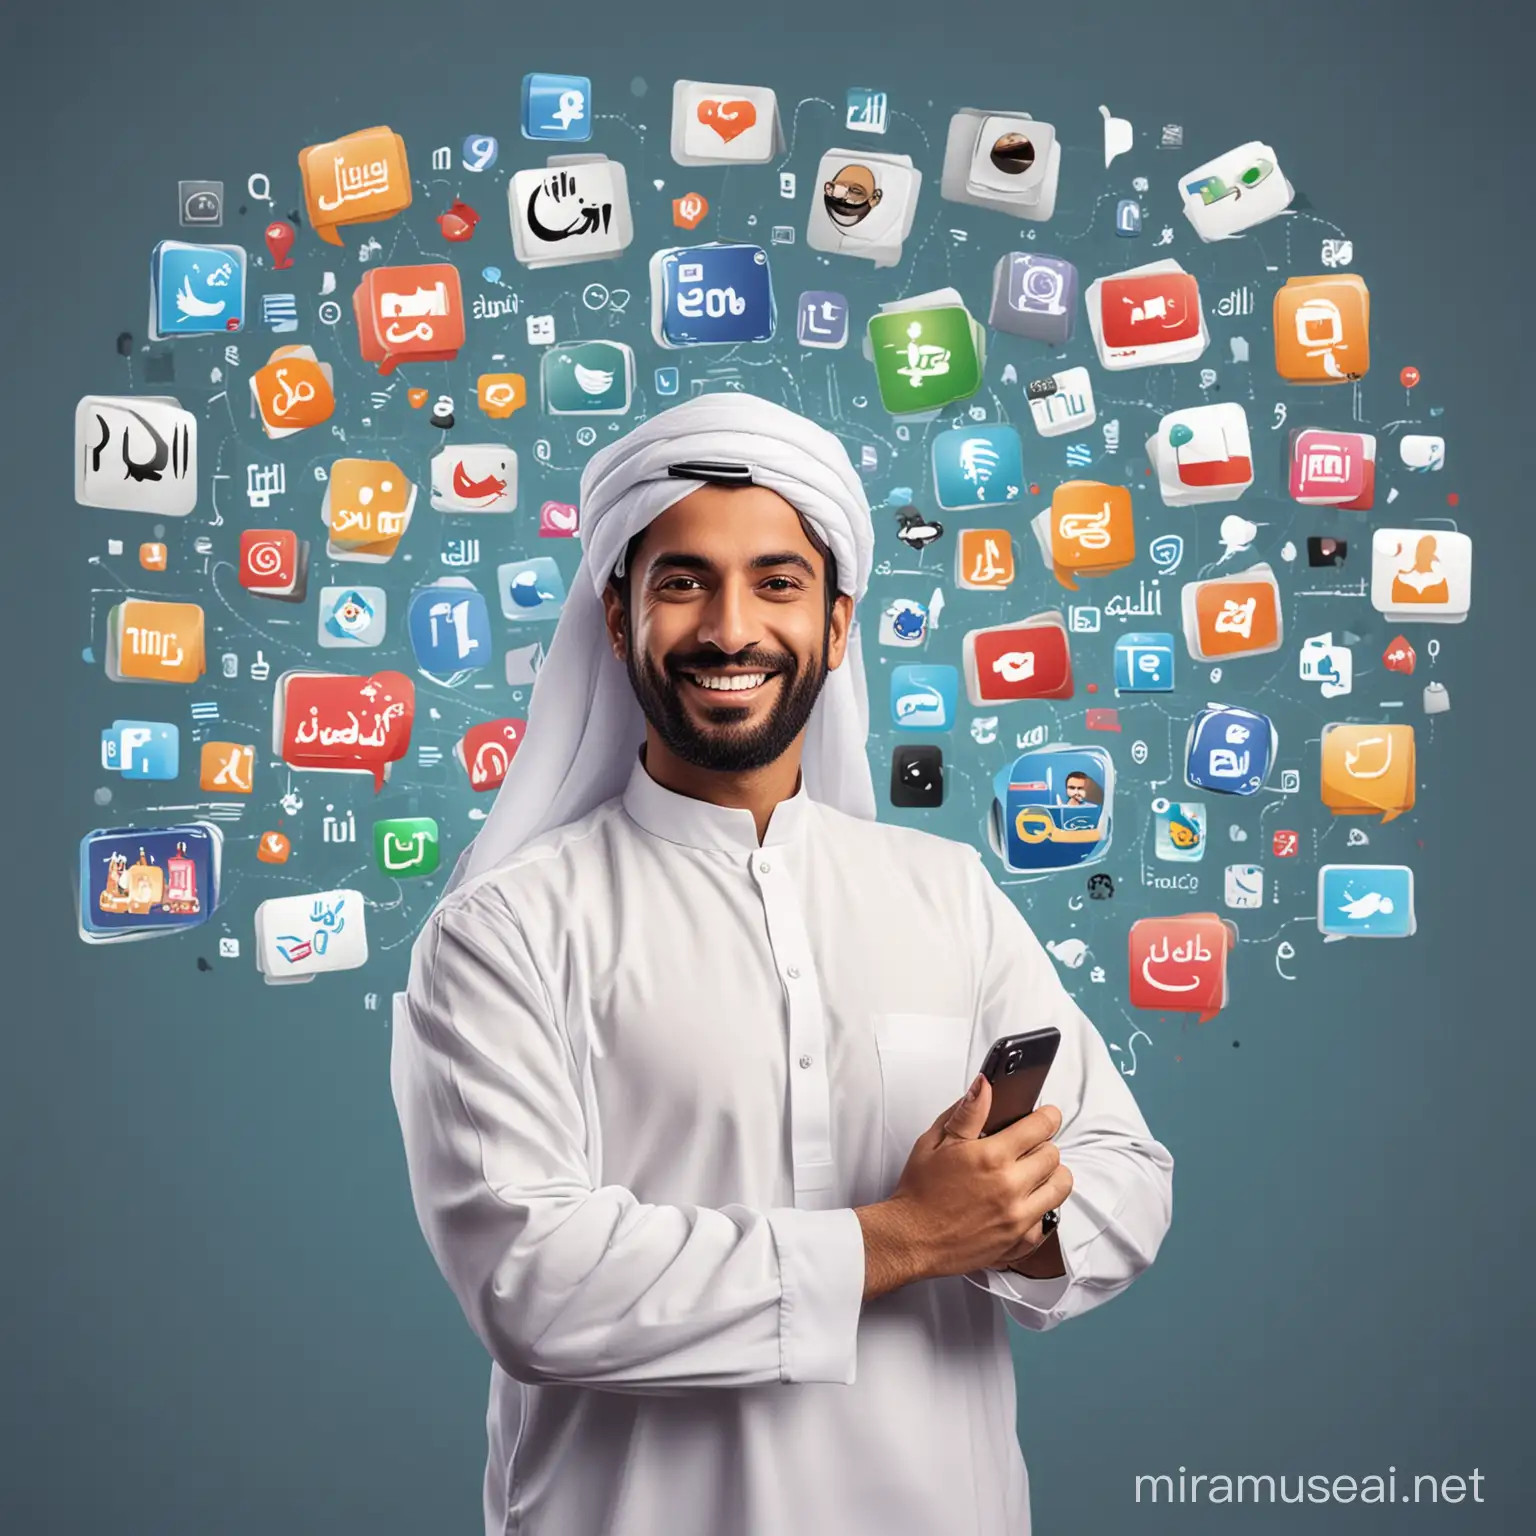 Arabic man wearing Kandora, happy expression in action pose, Behind the Arabic man show various social media icons and email, mobile and platforms interlinking,create a background that shows all aspects of a digital marketing company, Dubai background